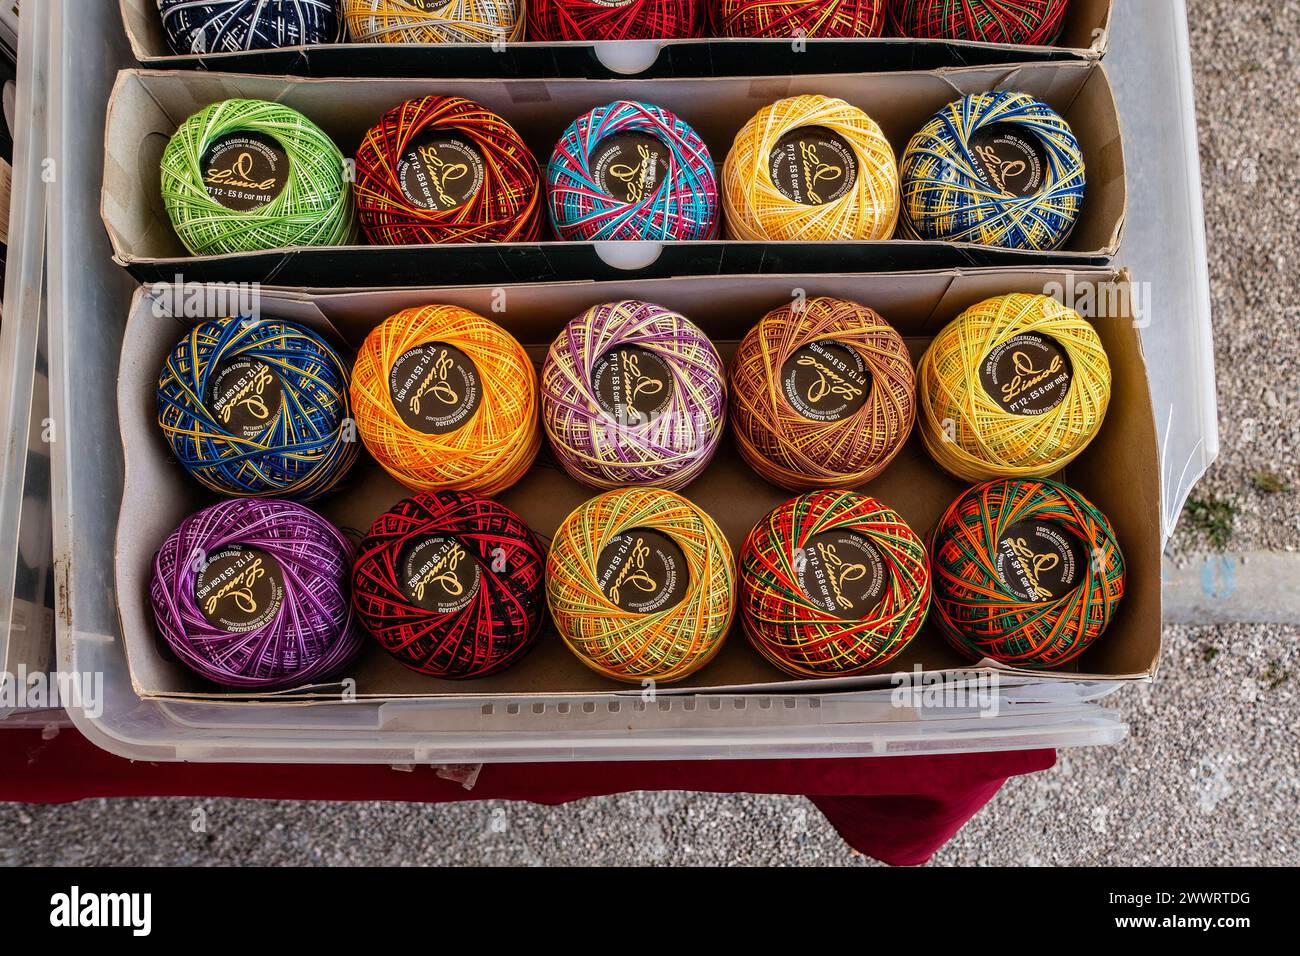 Colorful Handcrafted Yarn Balls Displayed in Cardboard Boxes at Outdoor Market Stall in Quarteira, Portugal. Stock Photo